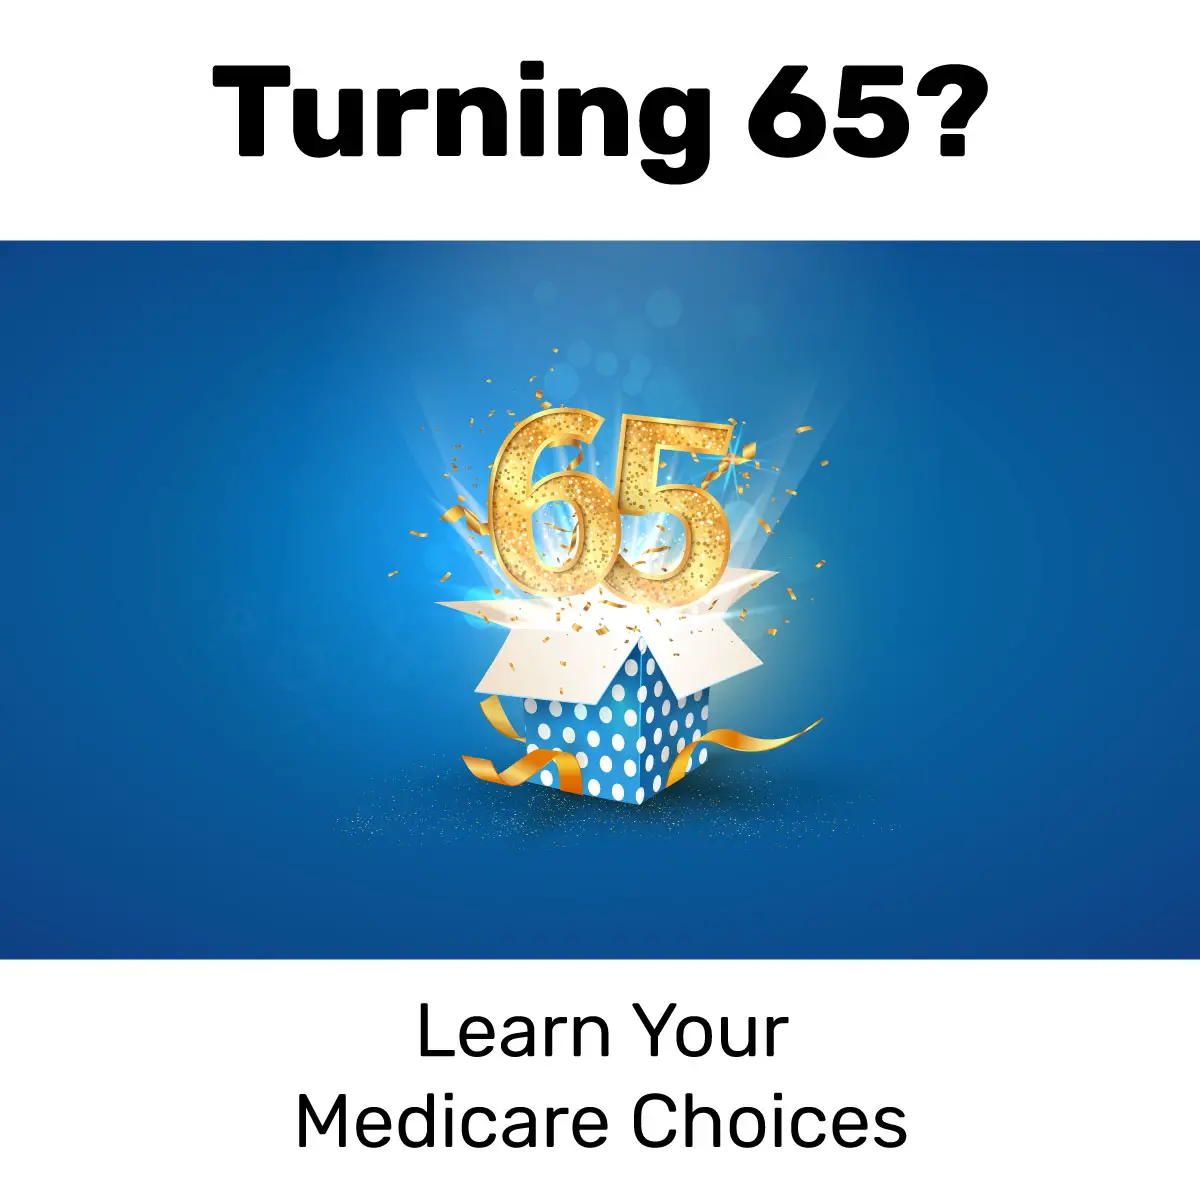 Are You Turning 65?